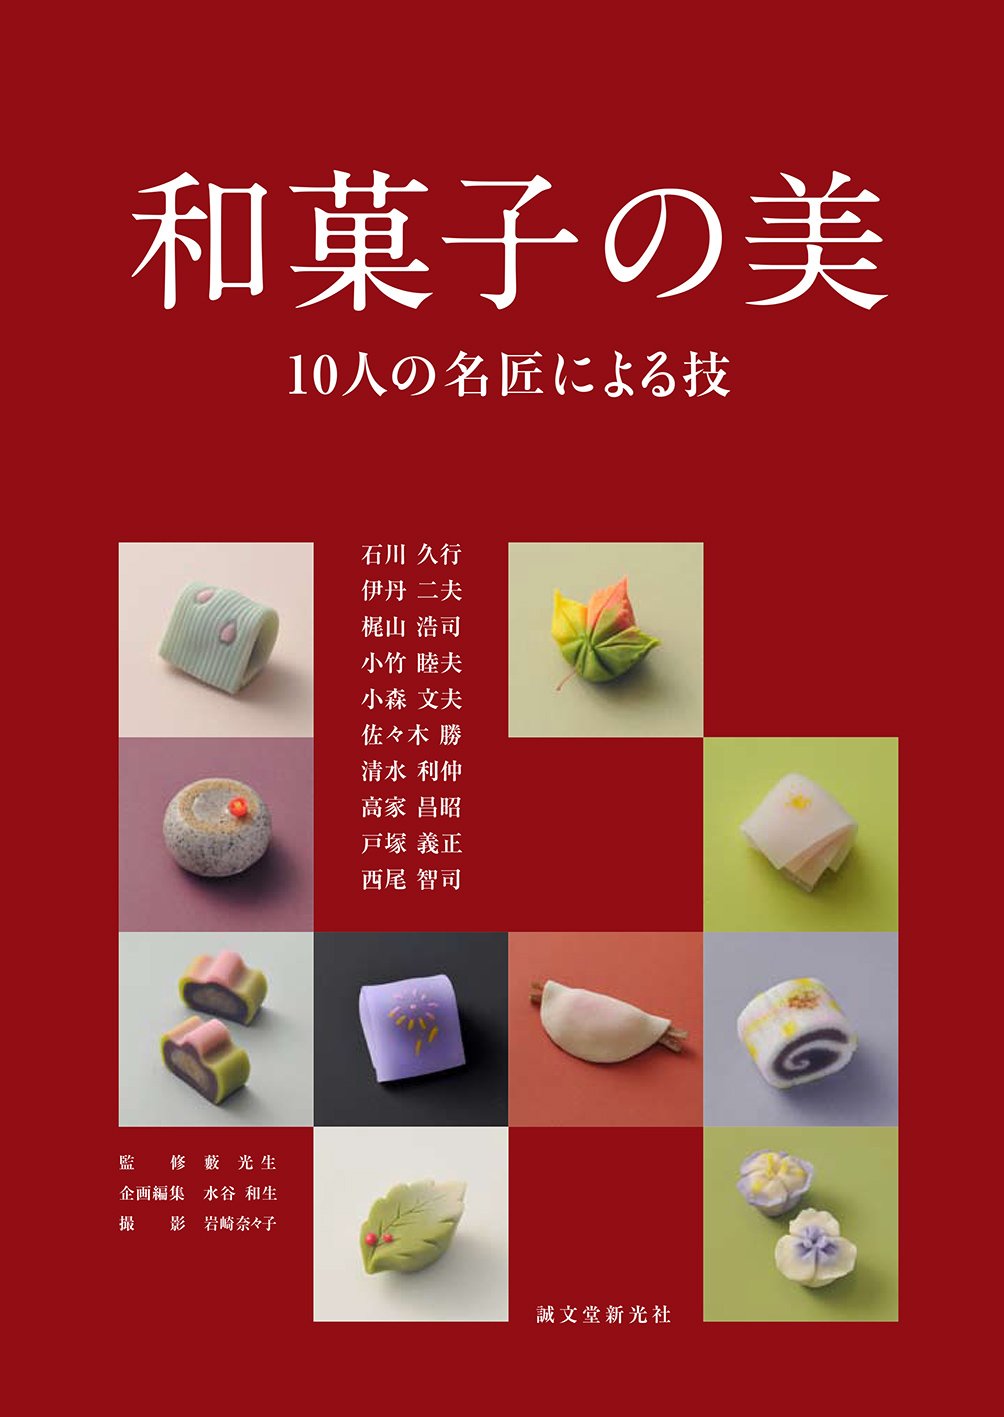 The beauty of Japanese sweets